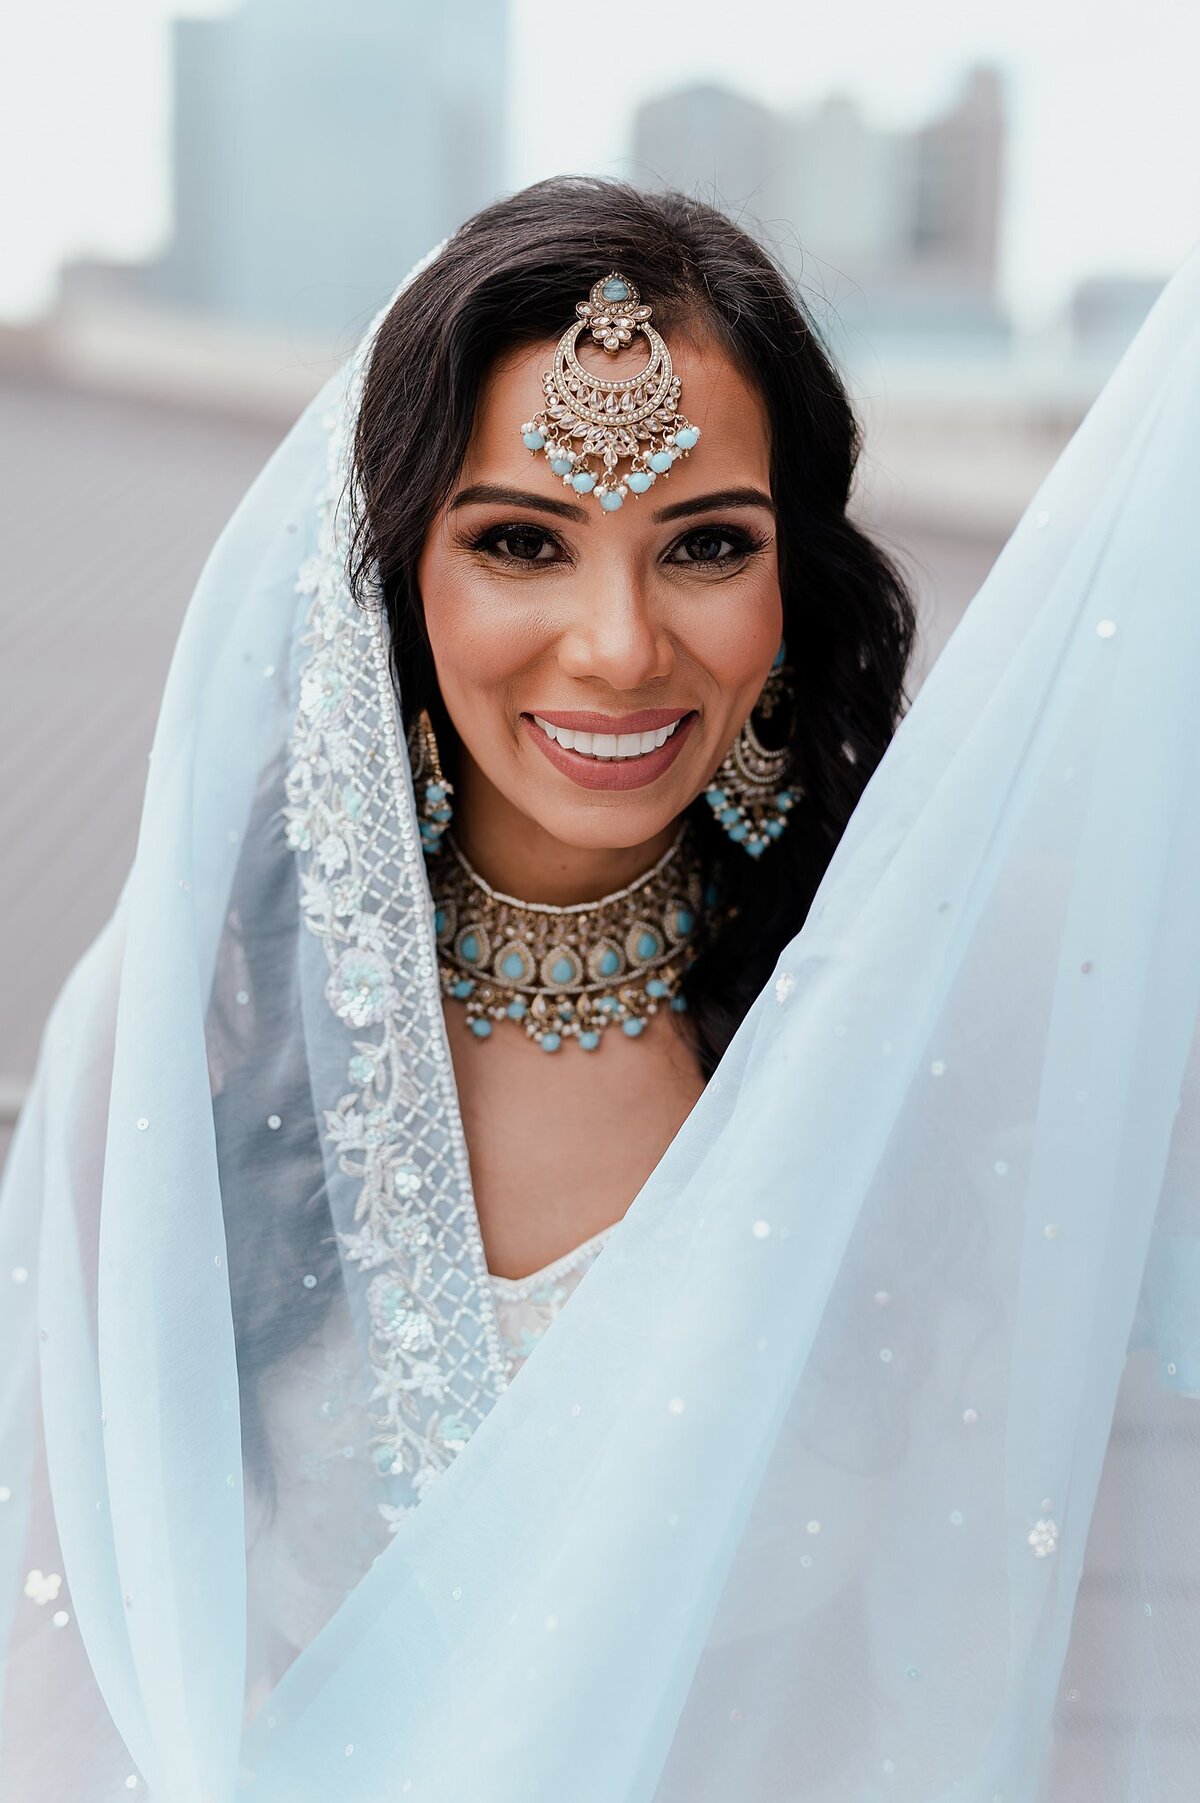 The Indian bride holds up her light blue dupatta as she smiles at the camera displaying her light blue and gold wedding jewelry.